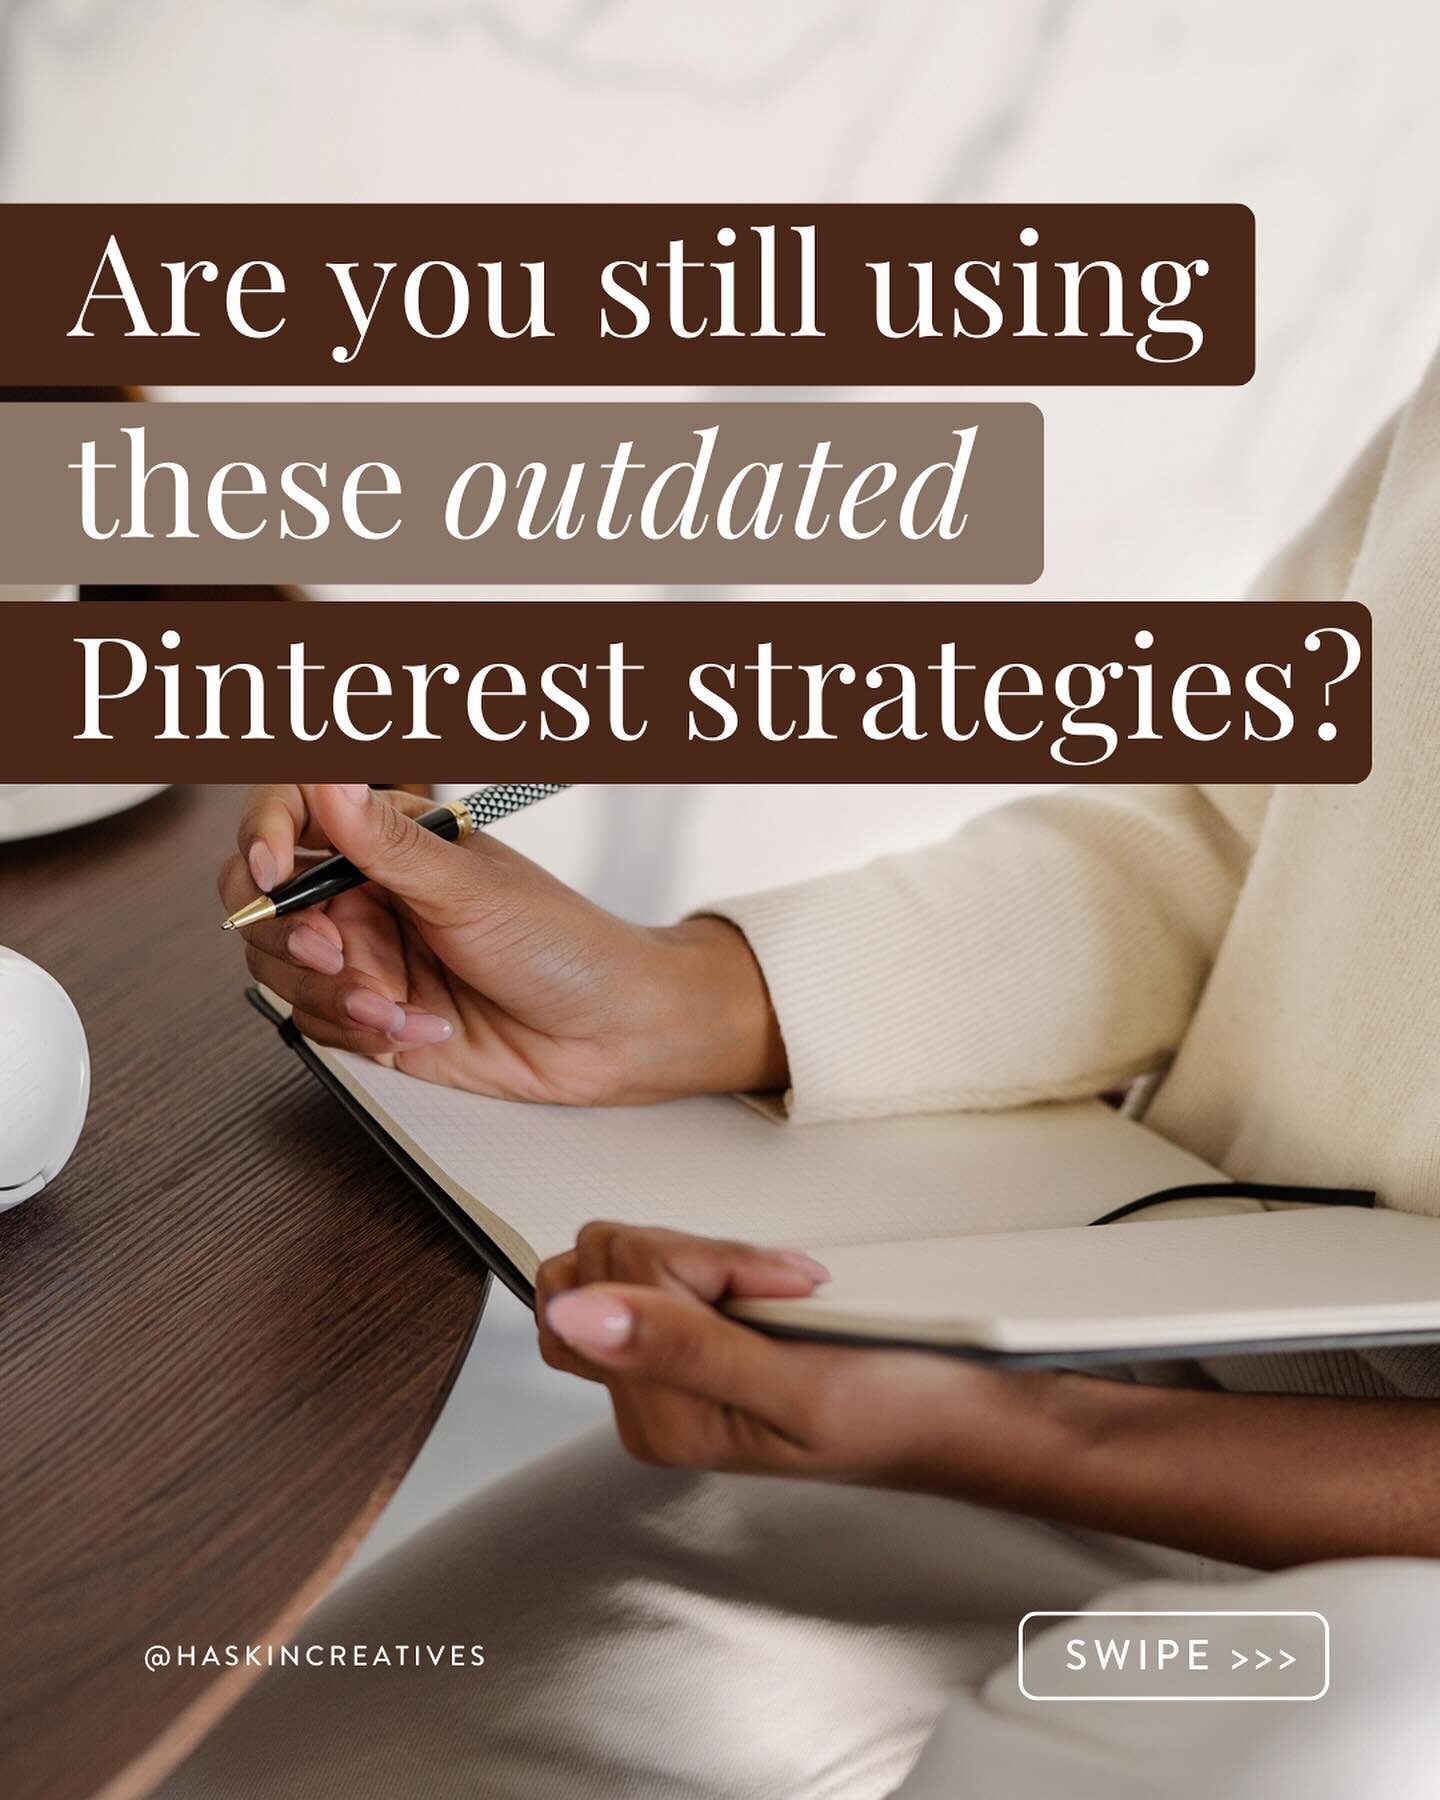 Pinterest strategy advice that makes me cringe😢💩

There is a lot of &lsquo;expert&rsquo; advice out there and while I don&rsquo;t believe it is intentionally misleading, the truth is that often the strategy the are describing works for them and mos